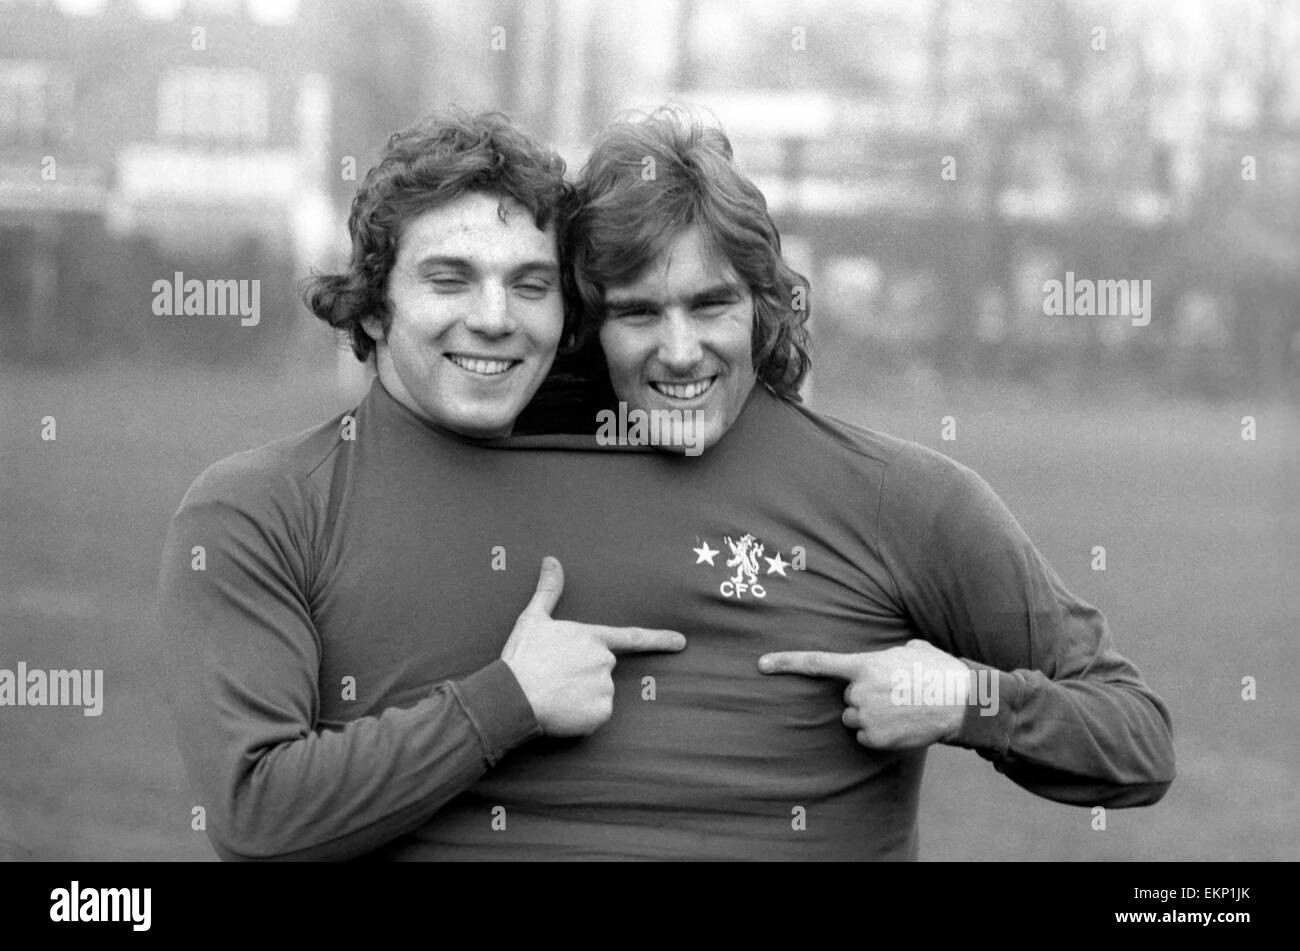 Steve Finnieston (20) striker and John Sparrow (17) defender members of the Chelsea Squad, pictured both wearing the same shirt during training at the Chelsea ground. February 1975 75-0715-001 Stock Photo